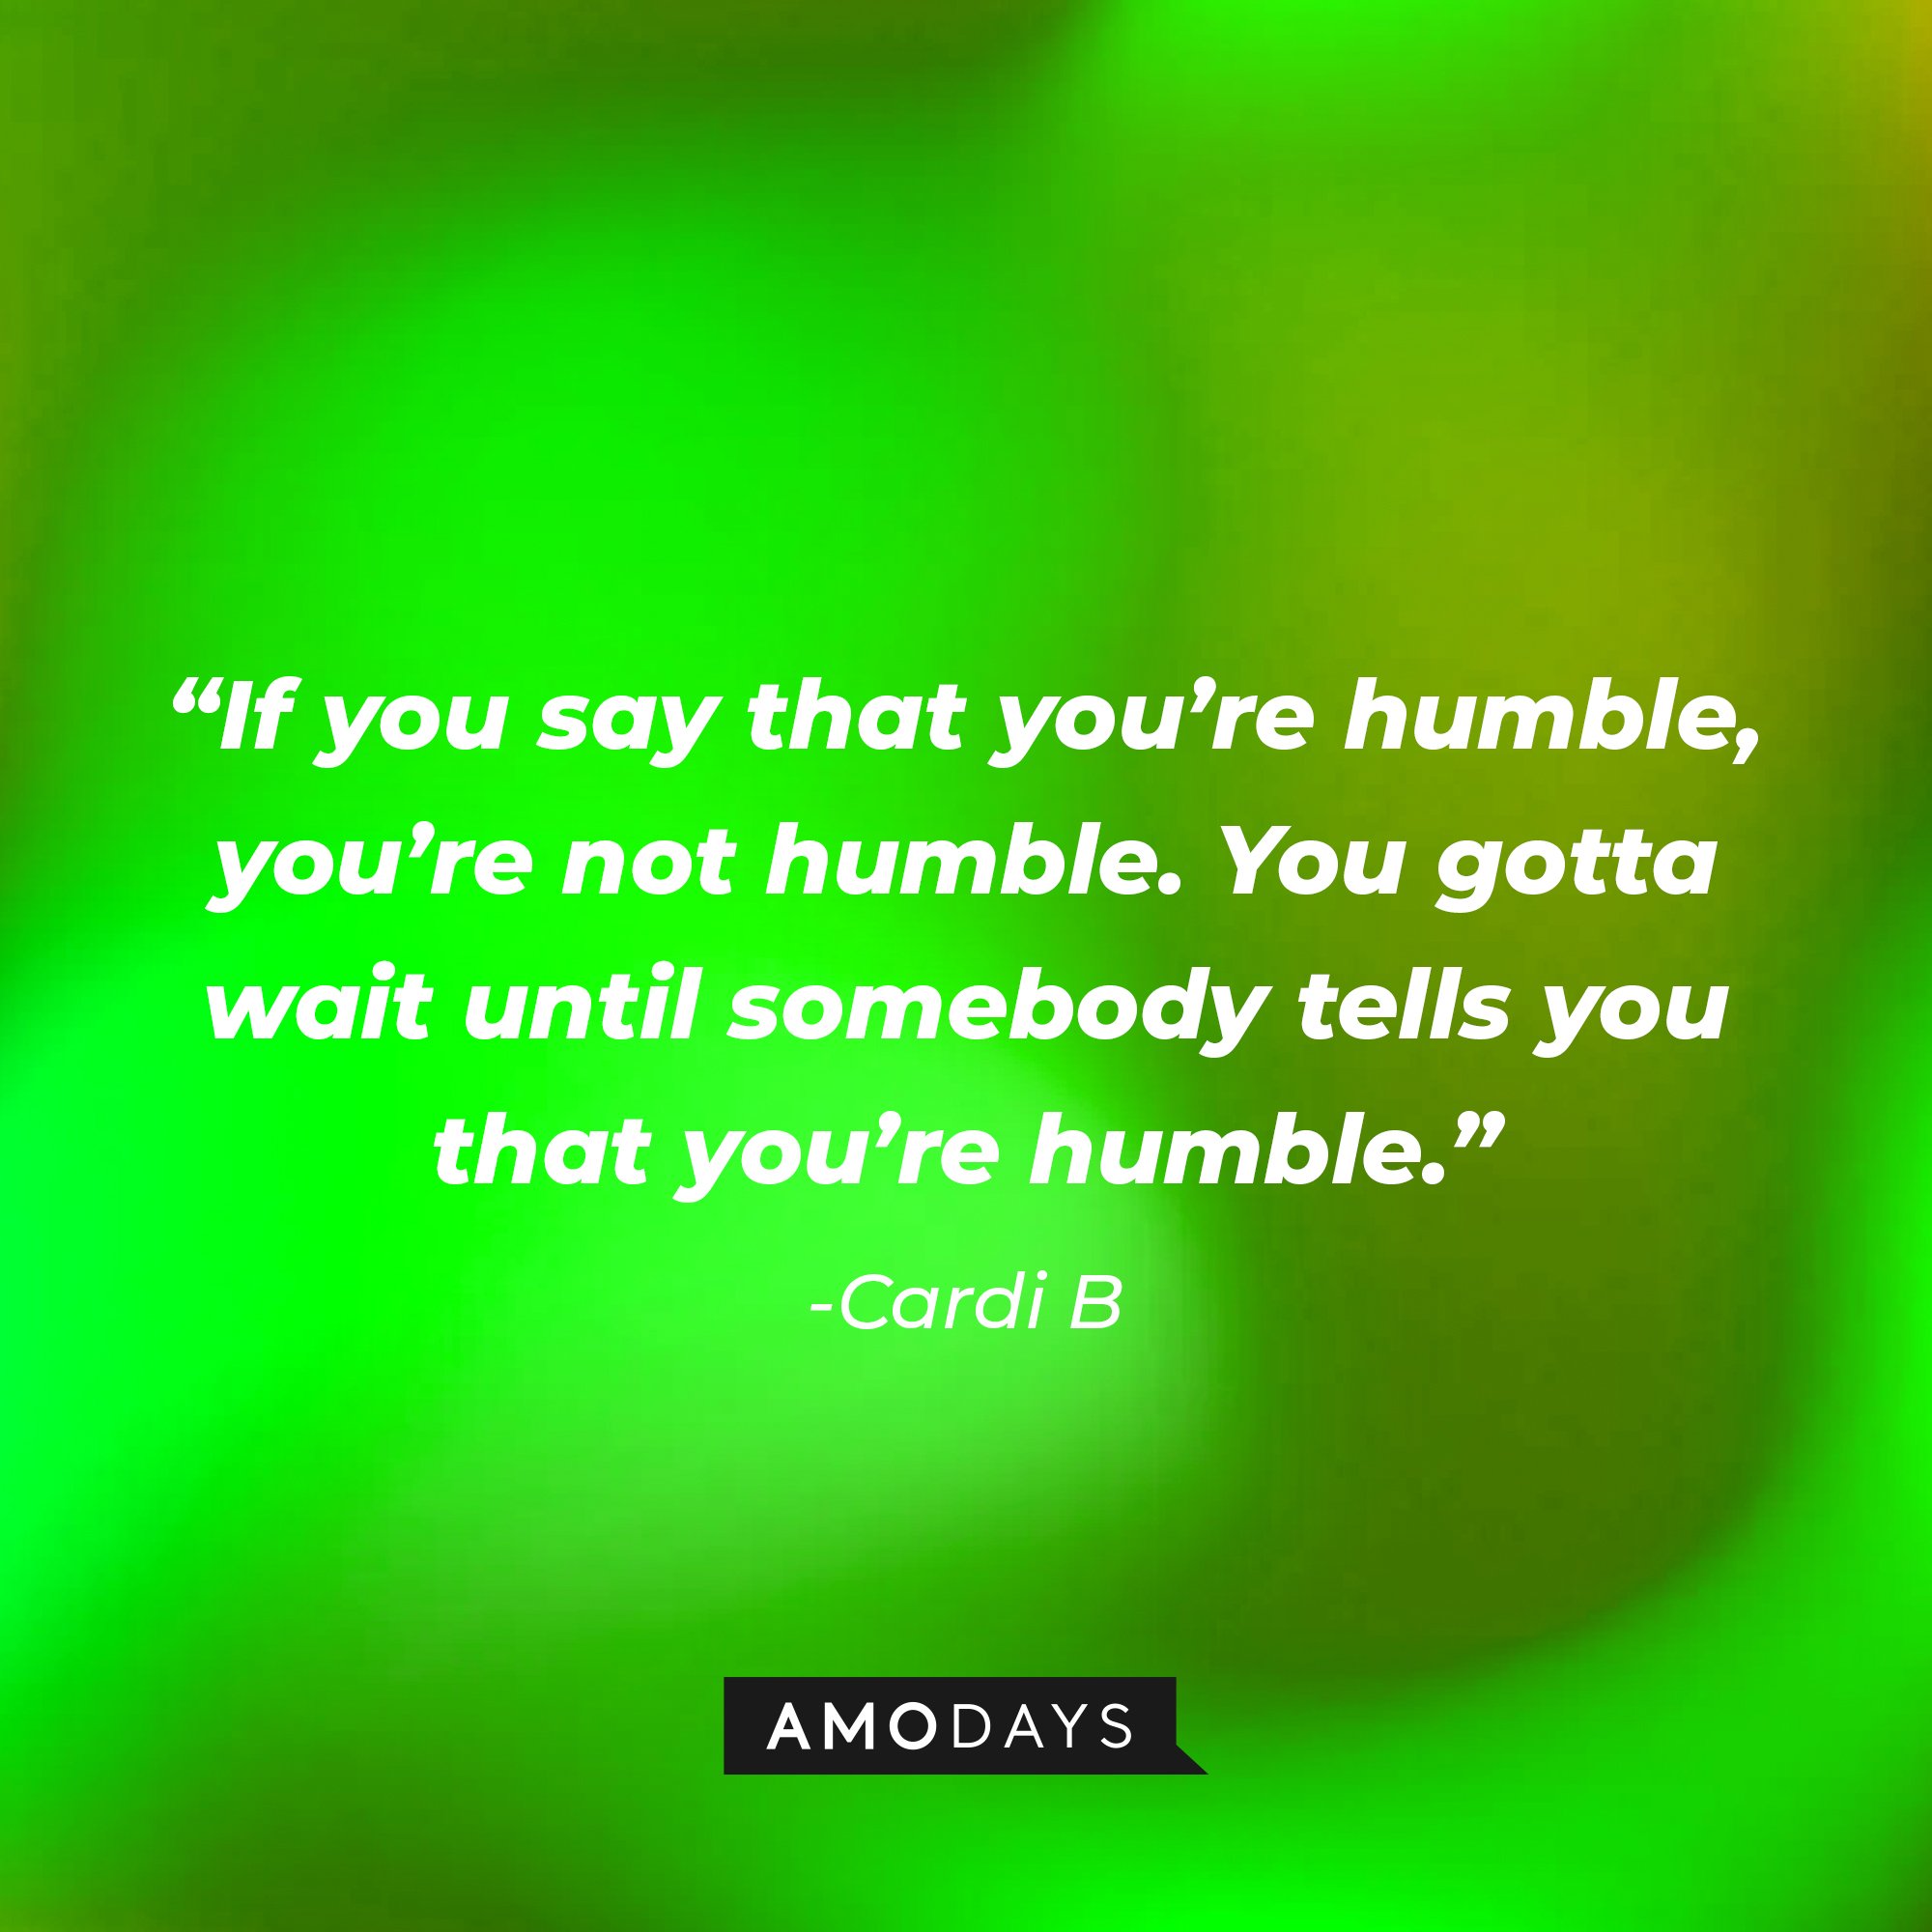 Cardi B's quotes: "If you say that you're humble, you're not humble. You gotta wait until somebody tells you that you're humble." | Image: AmoDays